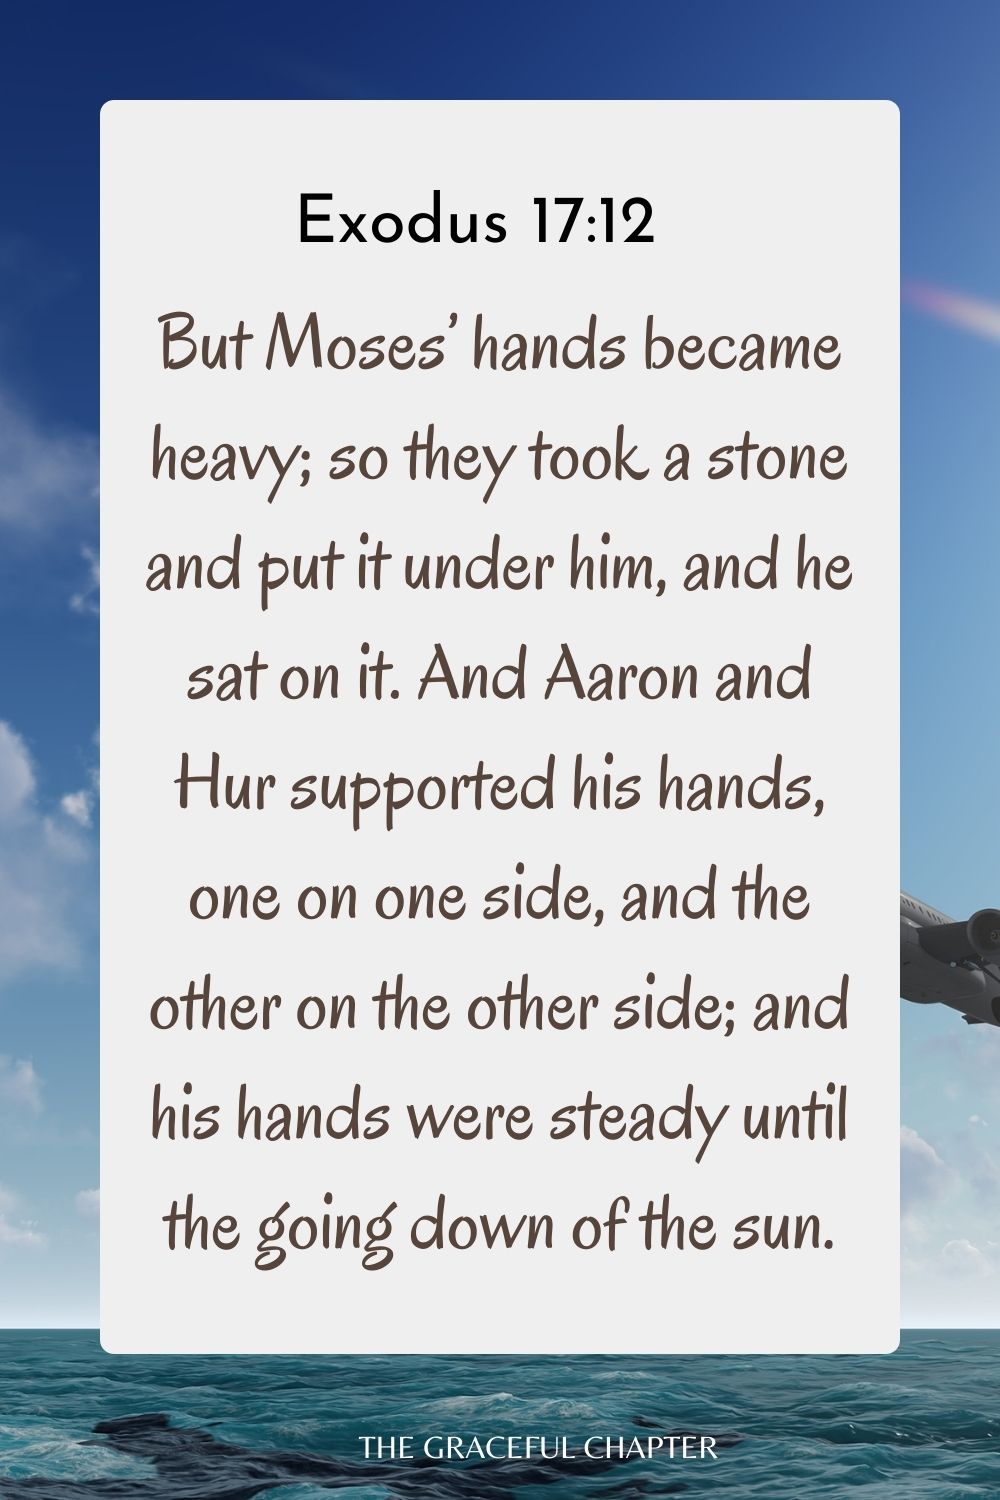 But Moses’ hands became heavy; so they took a stone and put it under him, and he sat on it. And Aaron and Hur supported his hands, one on one side, and the other on the other side; and his hands were steady until the going down of the sun. Exodus 17:12